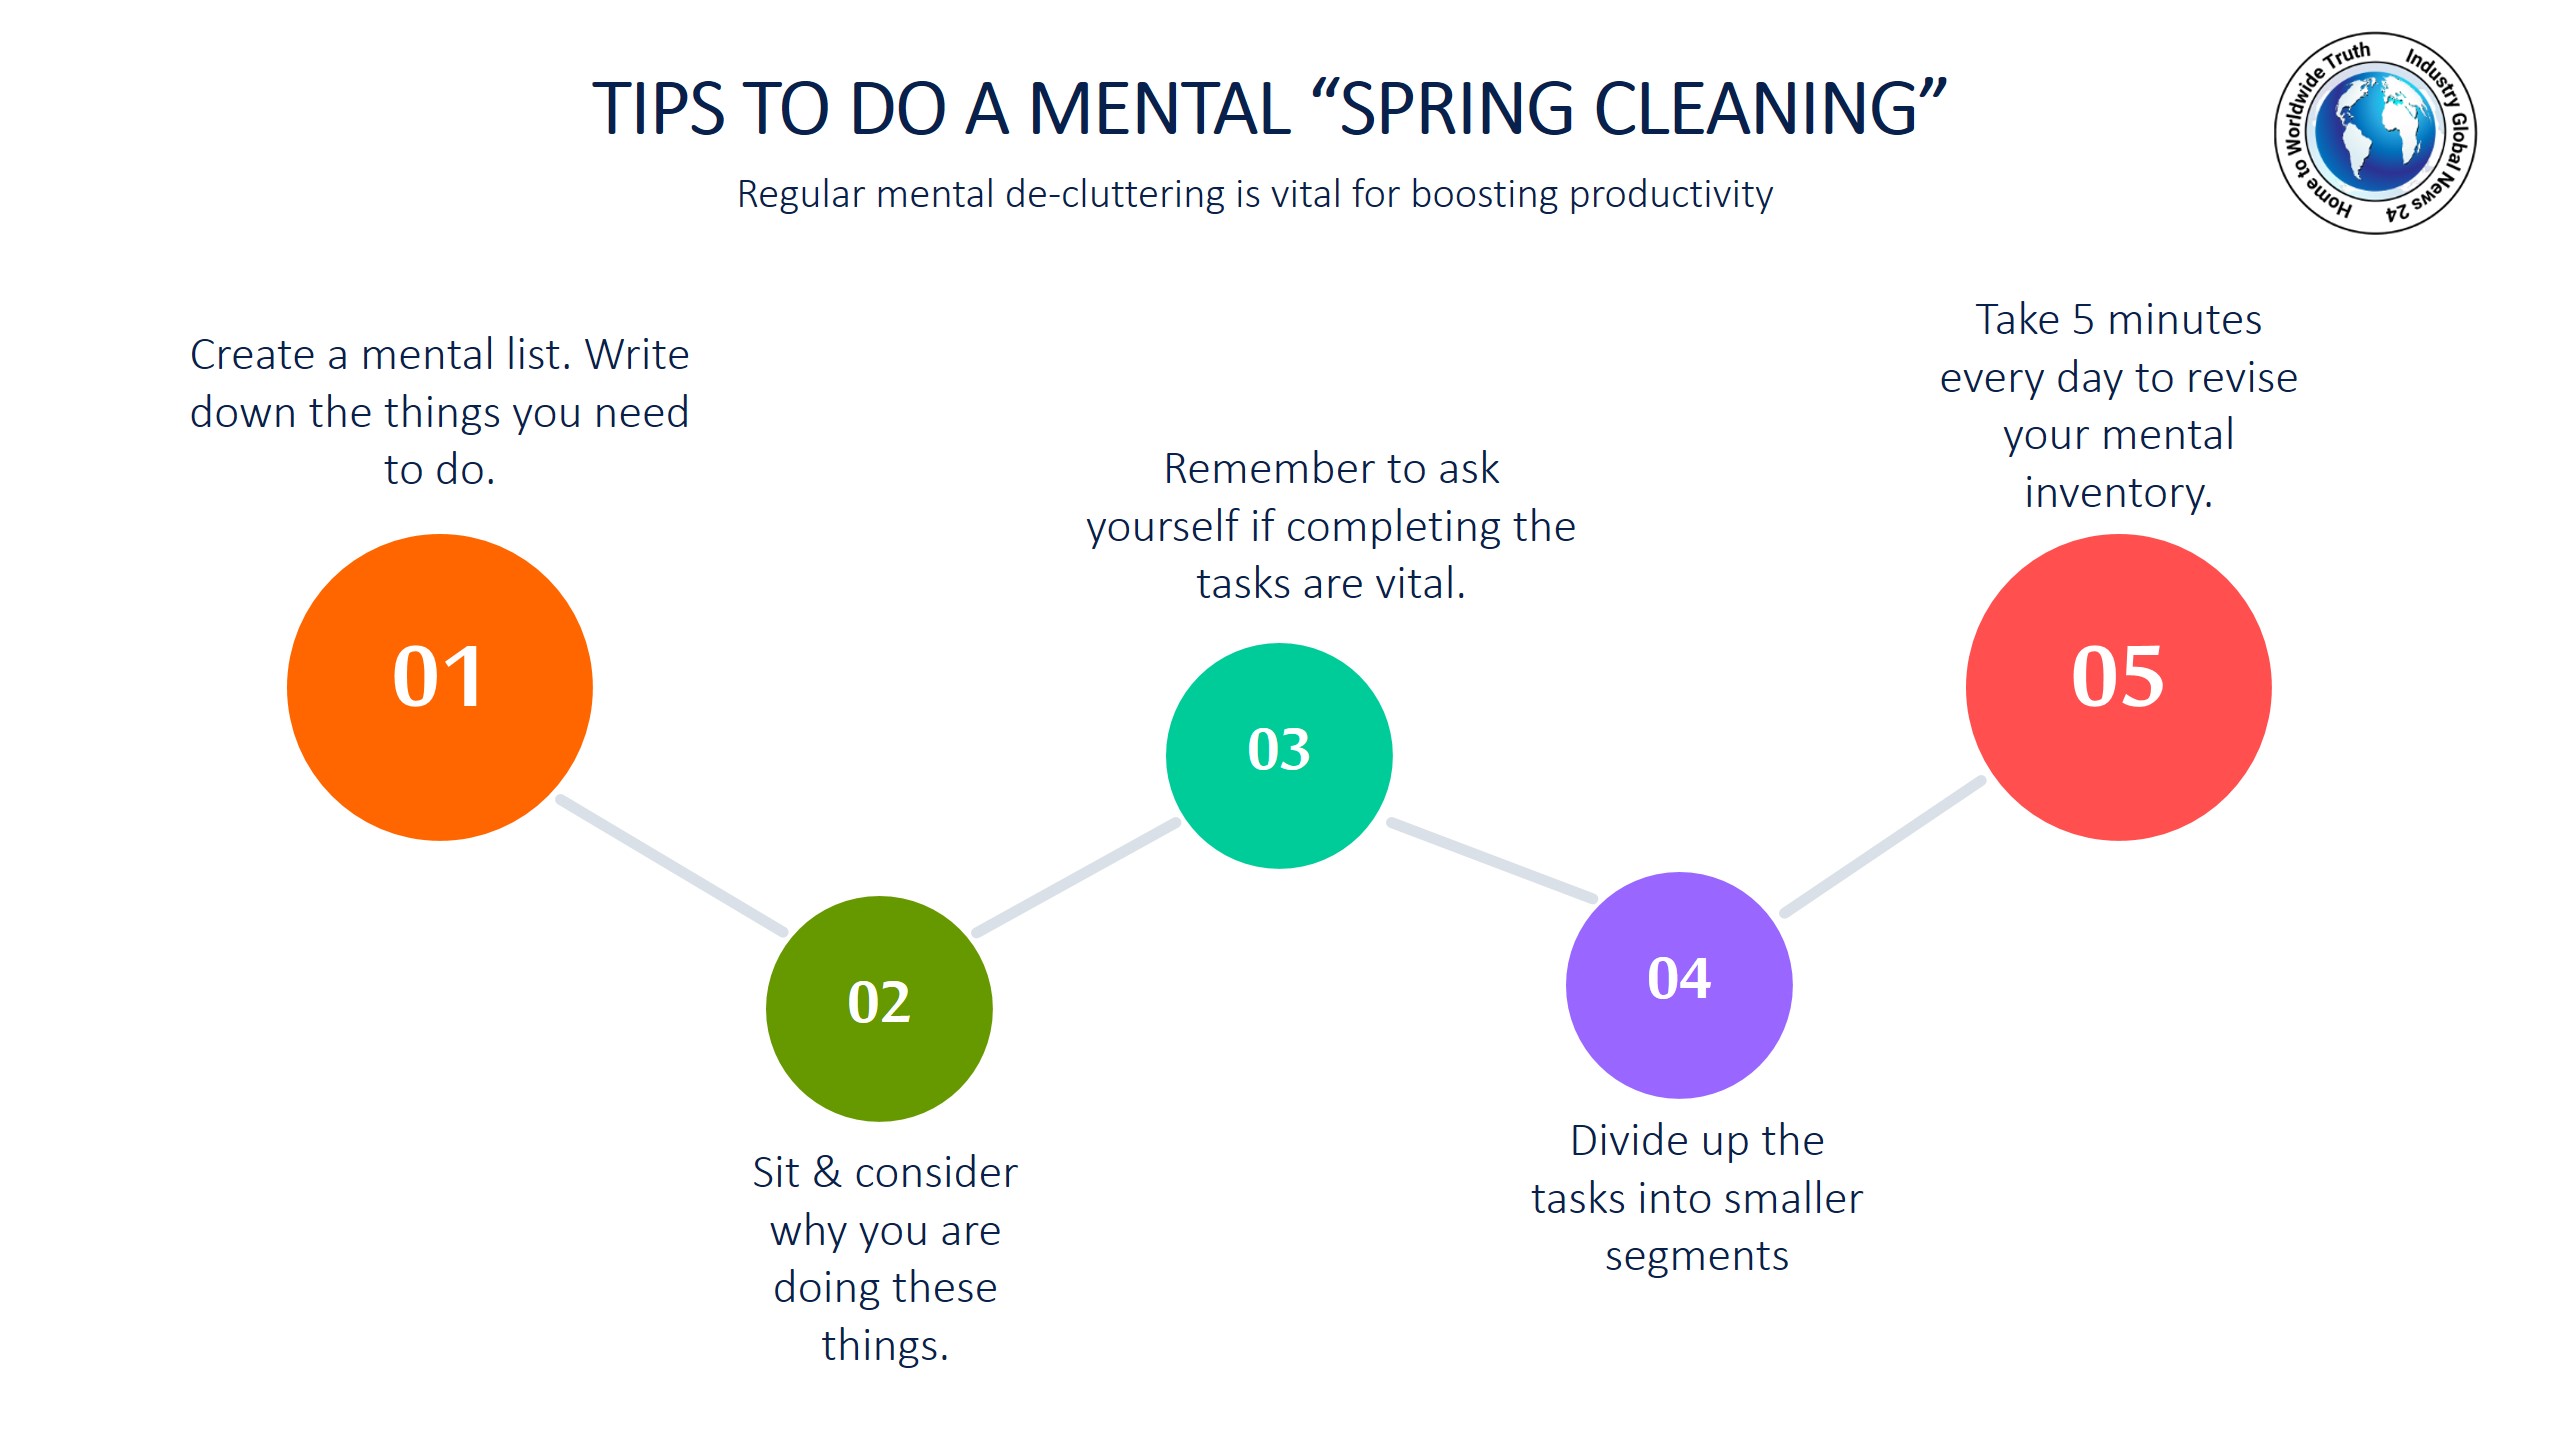 Tips to do a mental “Spring Cleaning”